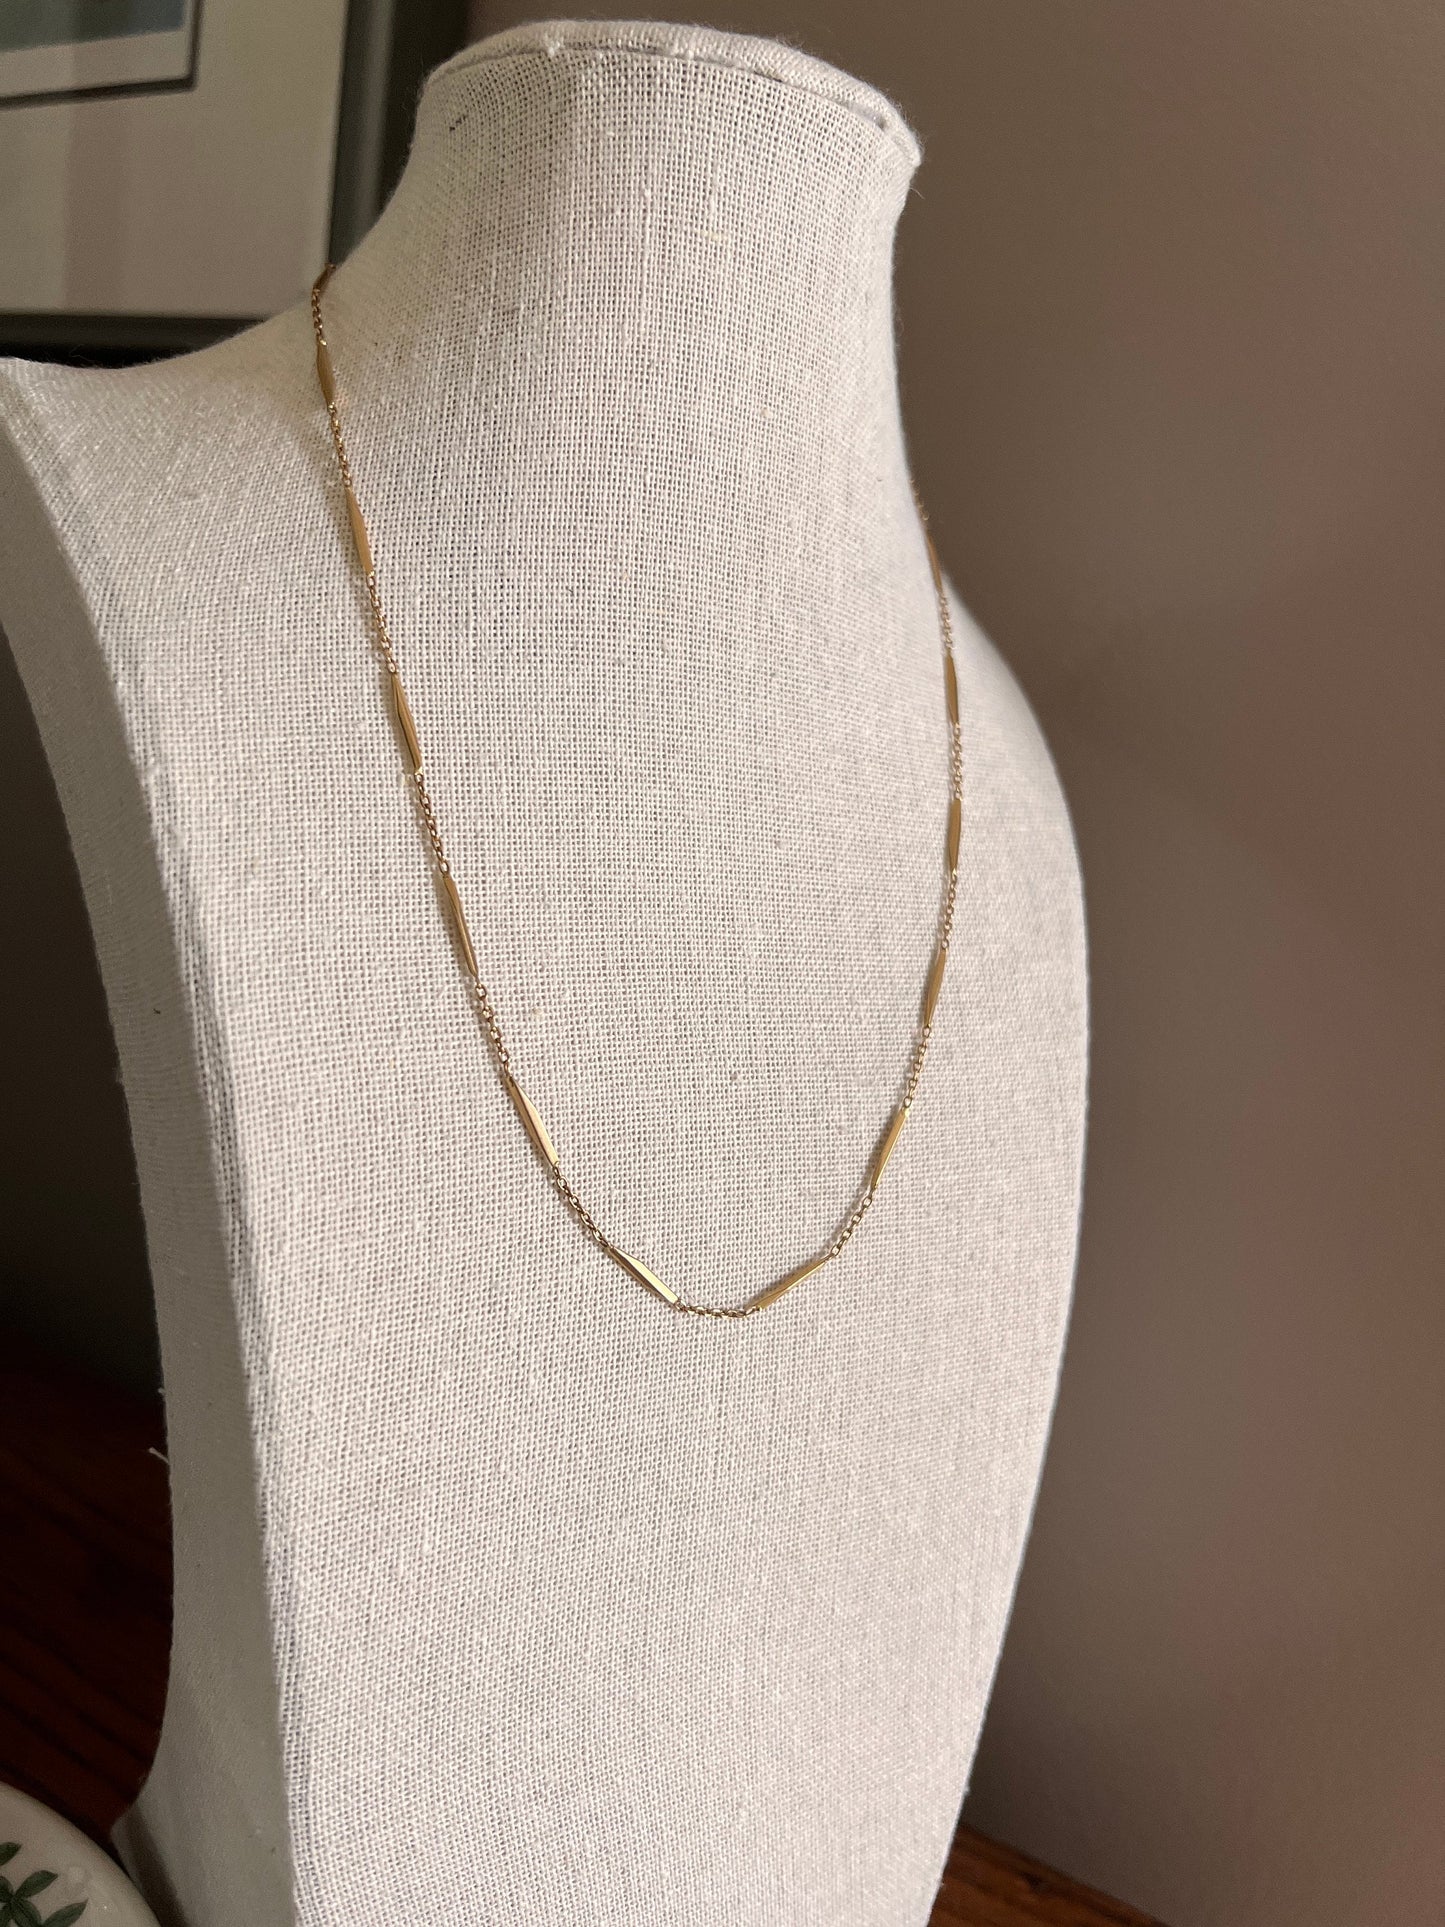 Faceted Bar Link Cable Alternating French ANTIQUE 5.6g 18k GOLD Solid 17.75" Dainty Layering Neckmess Neckstack Romantic Gift Warm Patina